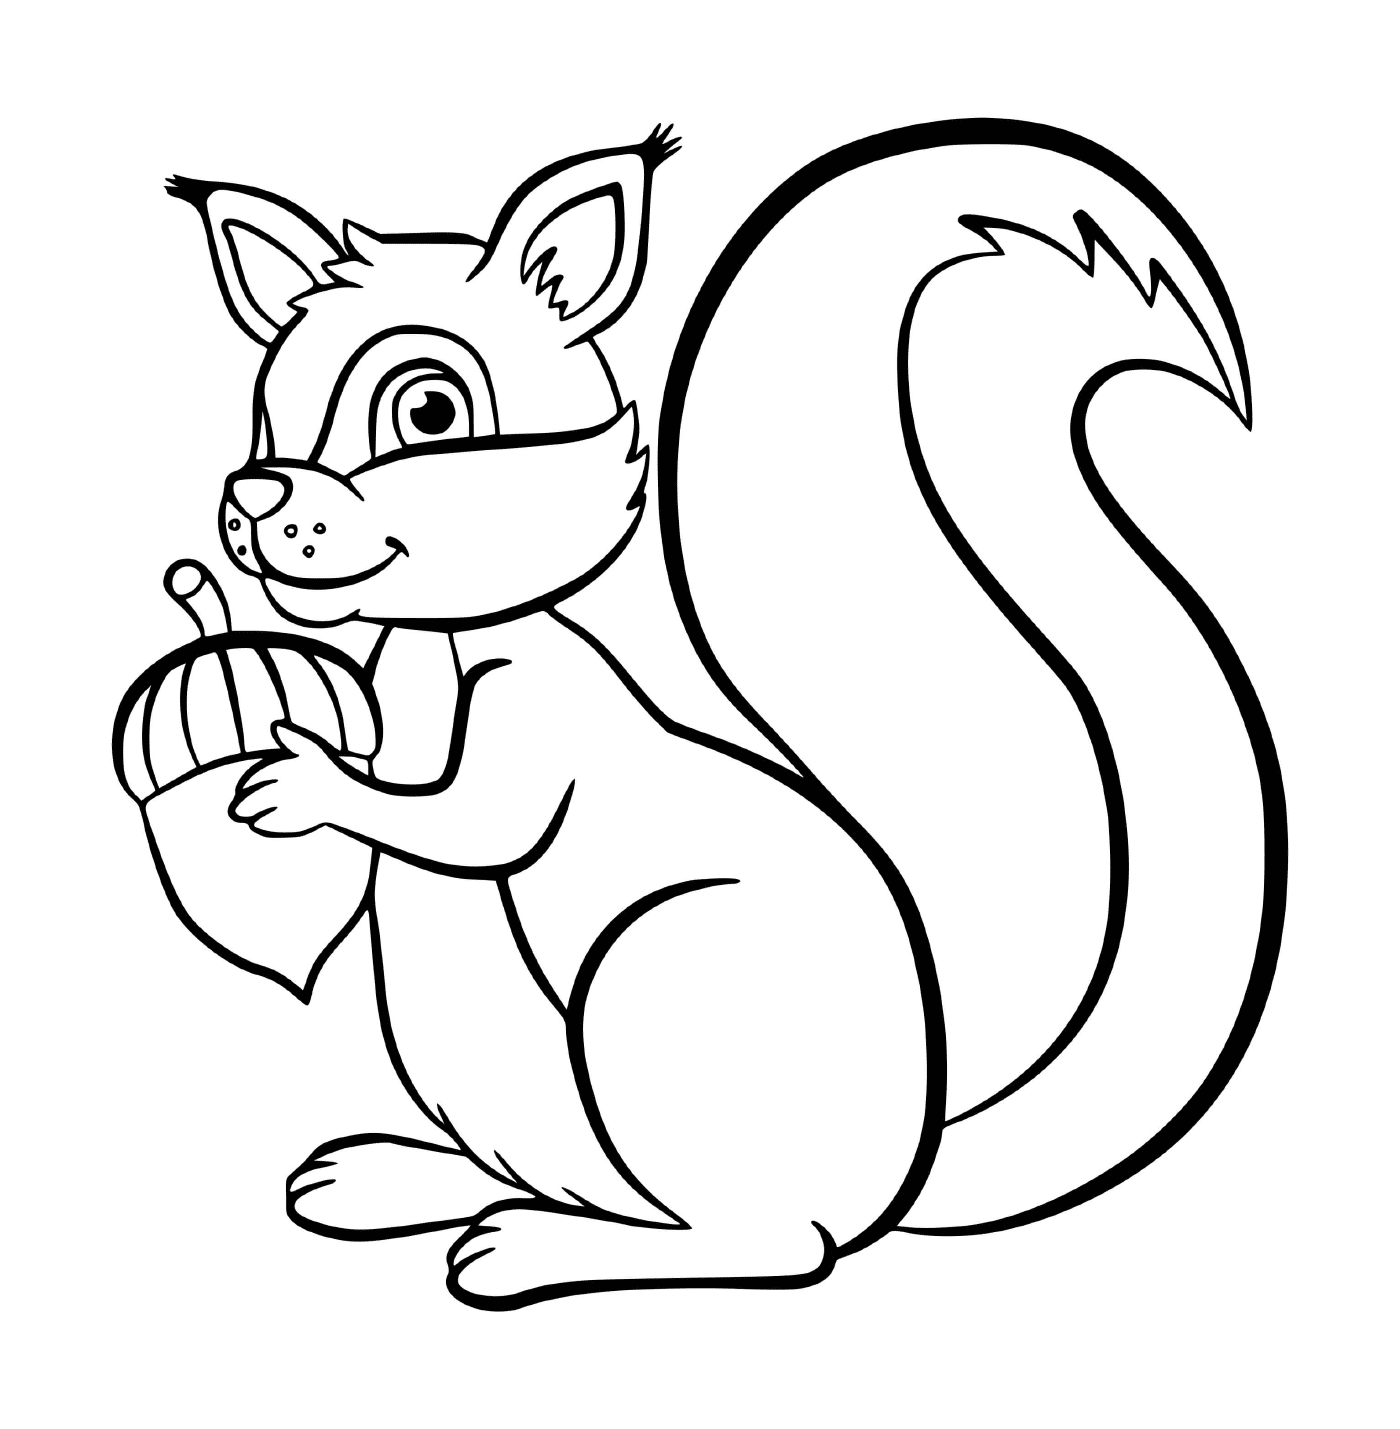  The squirrel (animated drawing) 